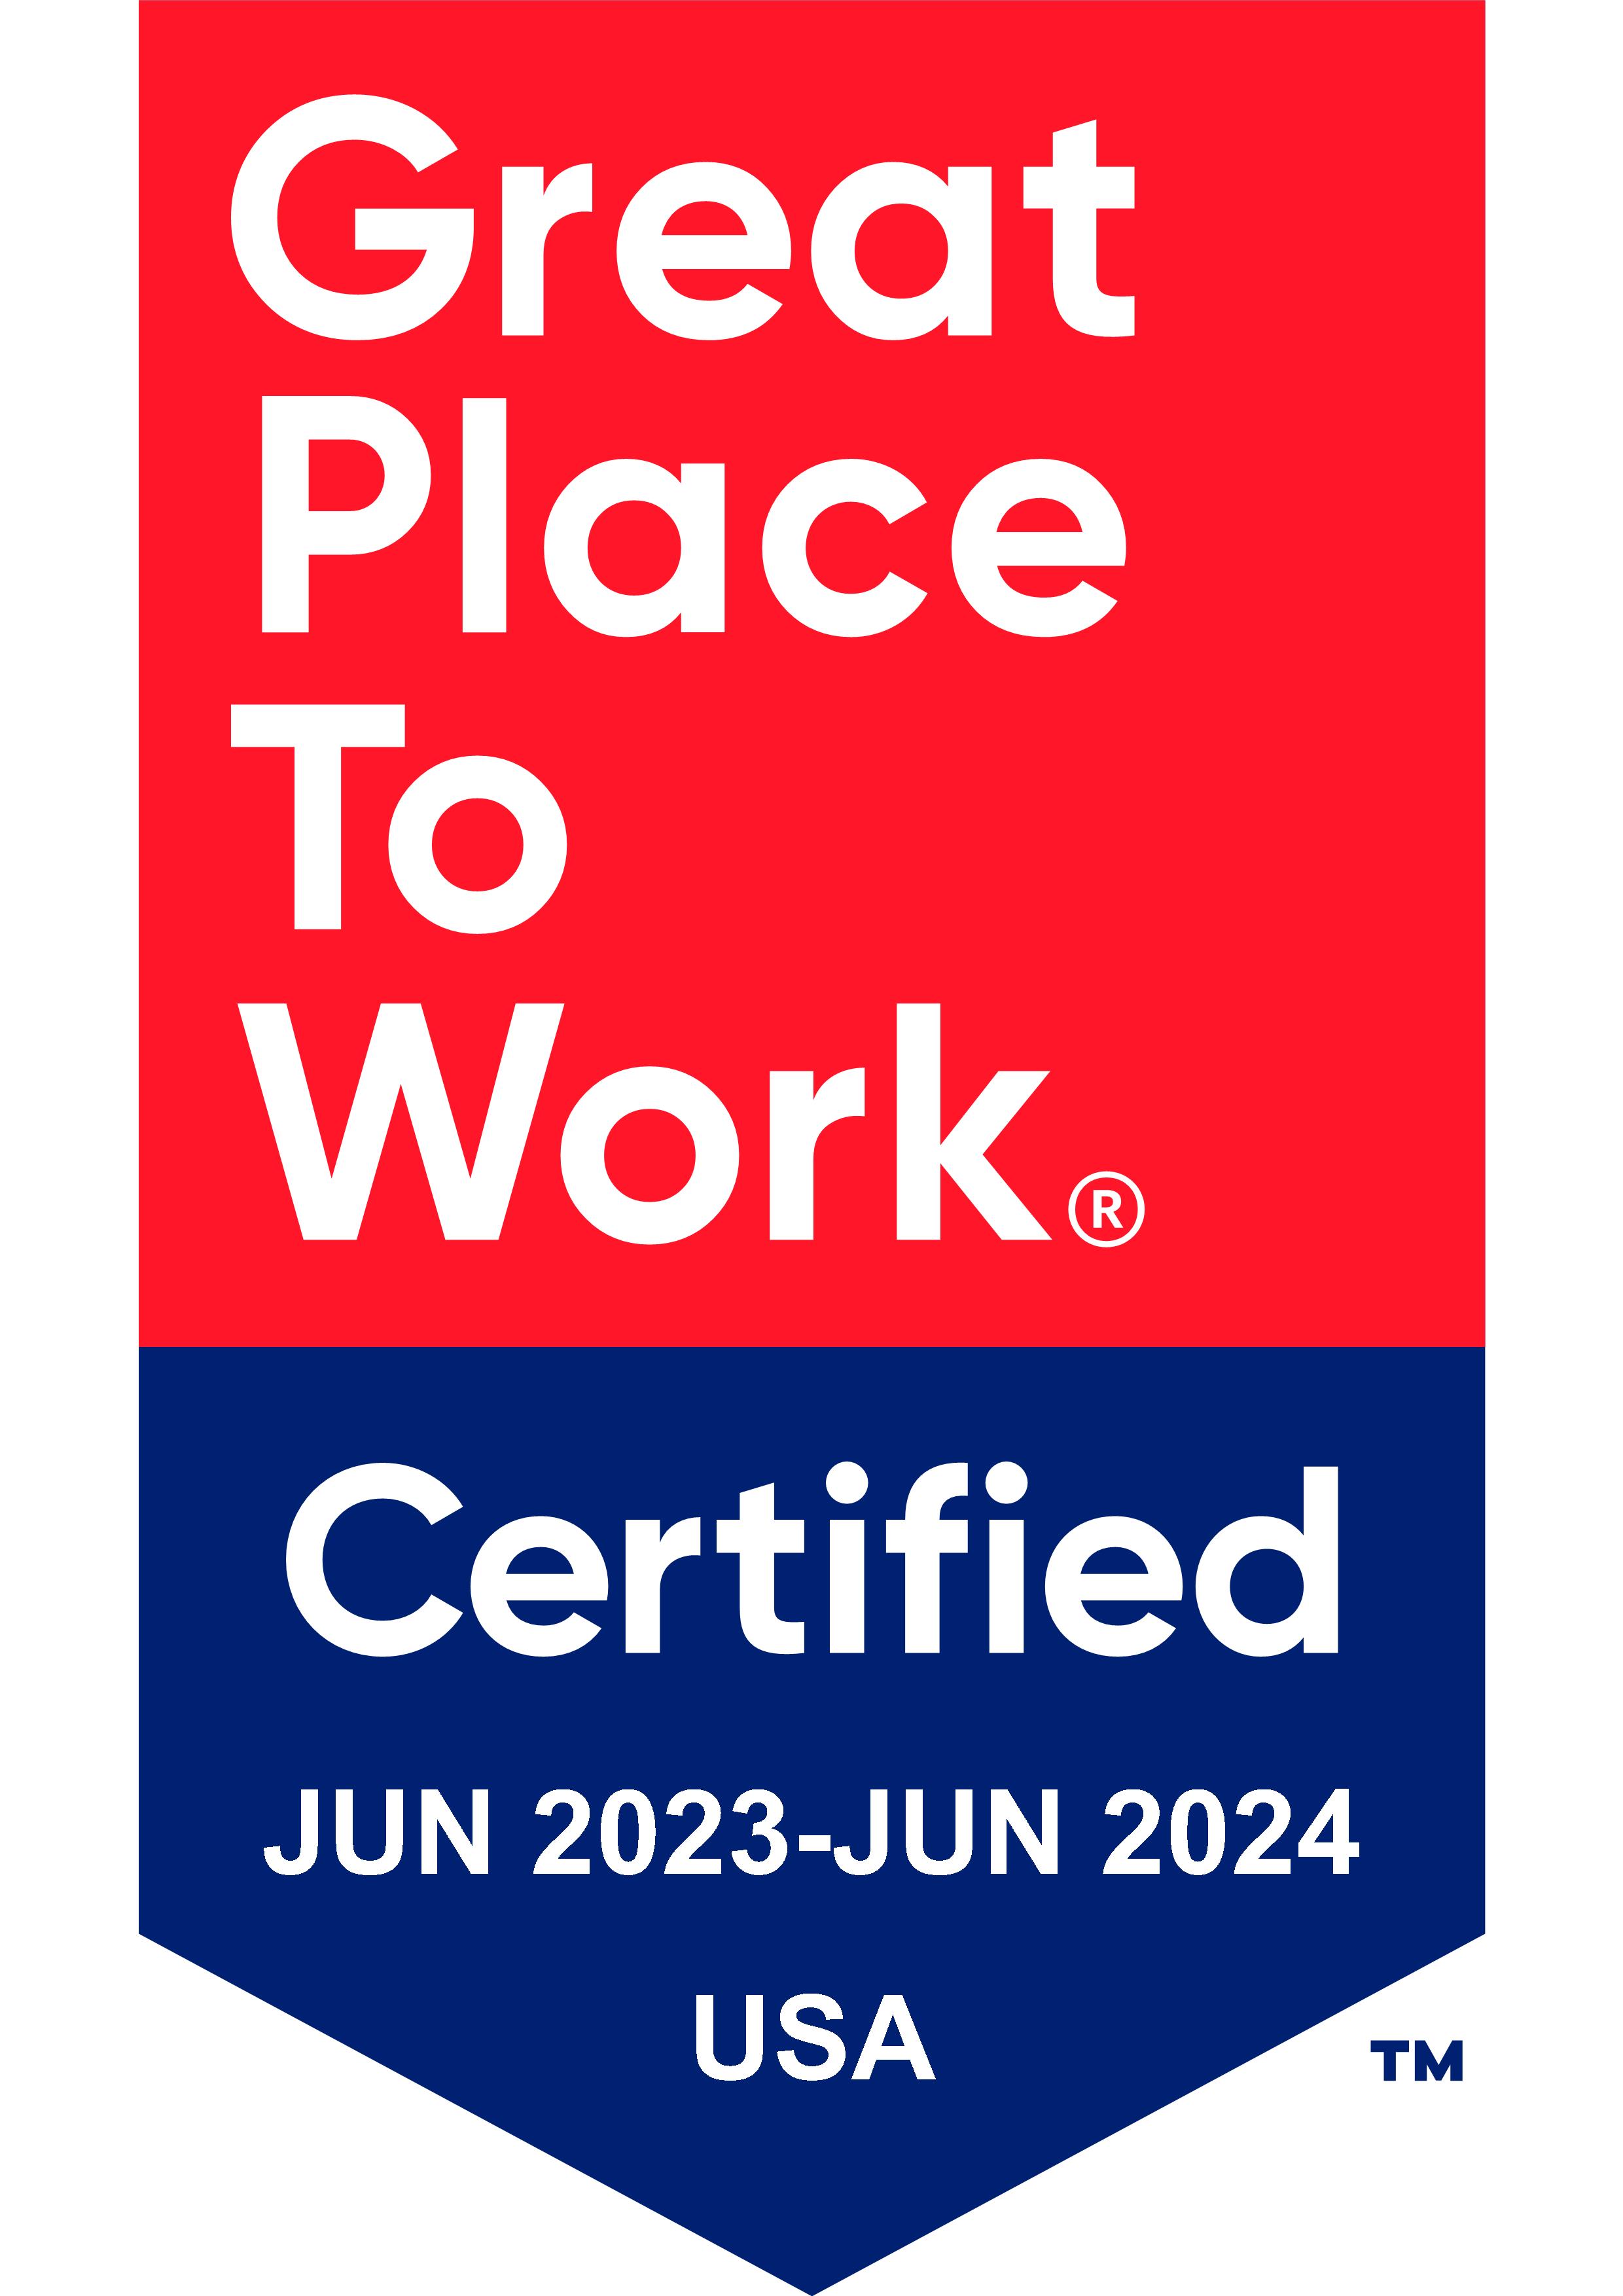 Great Place to Work Certified June 2023 - June 2024 USA